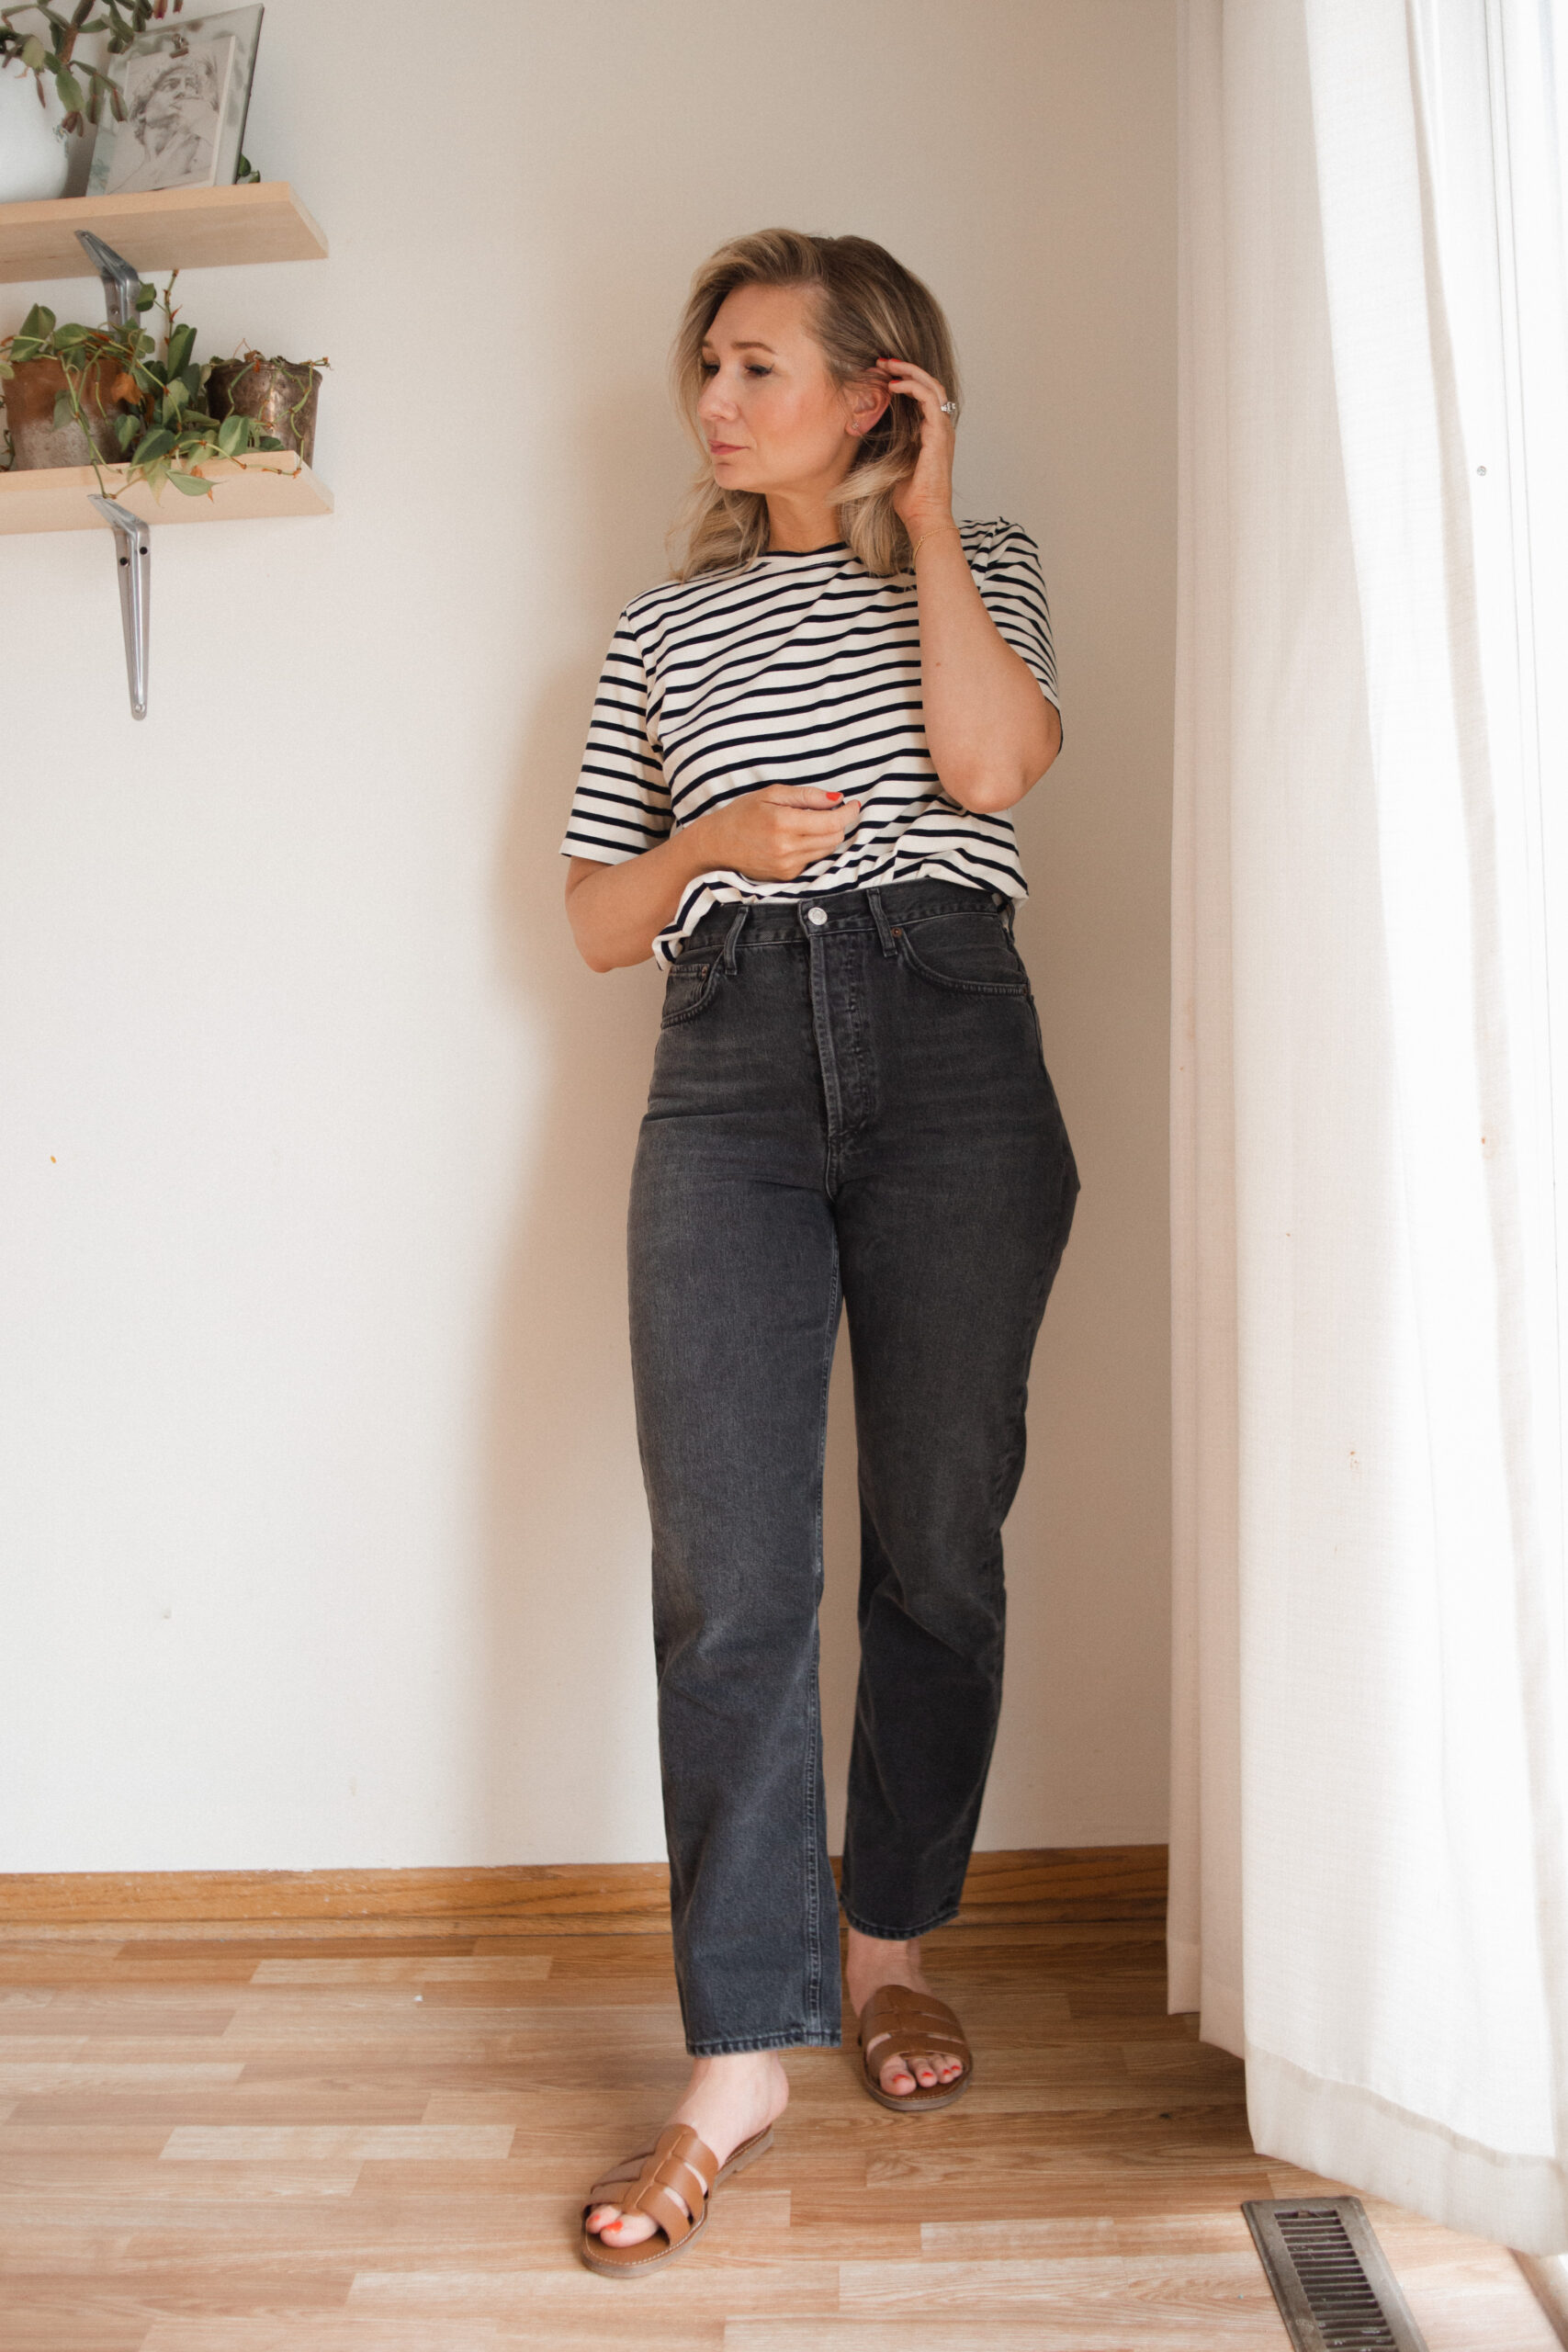 Karin Emily wears a pair of AGOLDE 90's midrise jeans with a striped tee and brown sandals for her AGOLDE denim guide